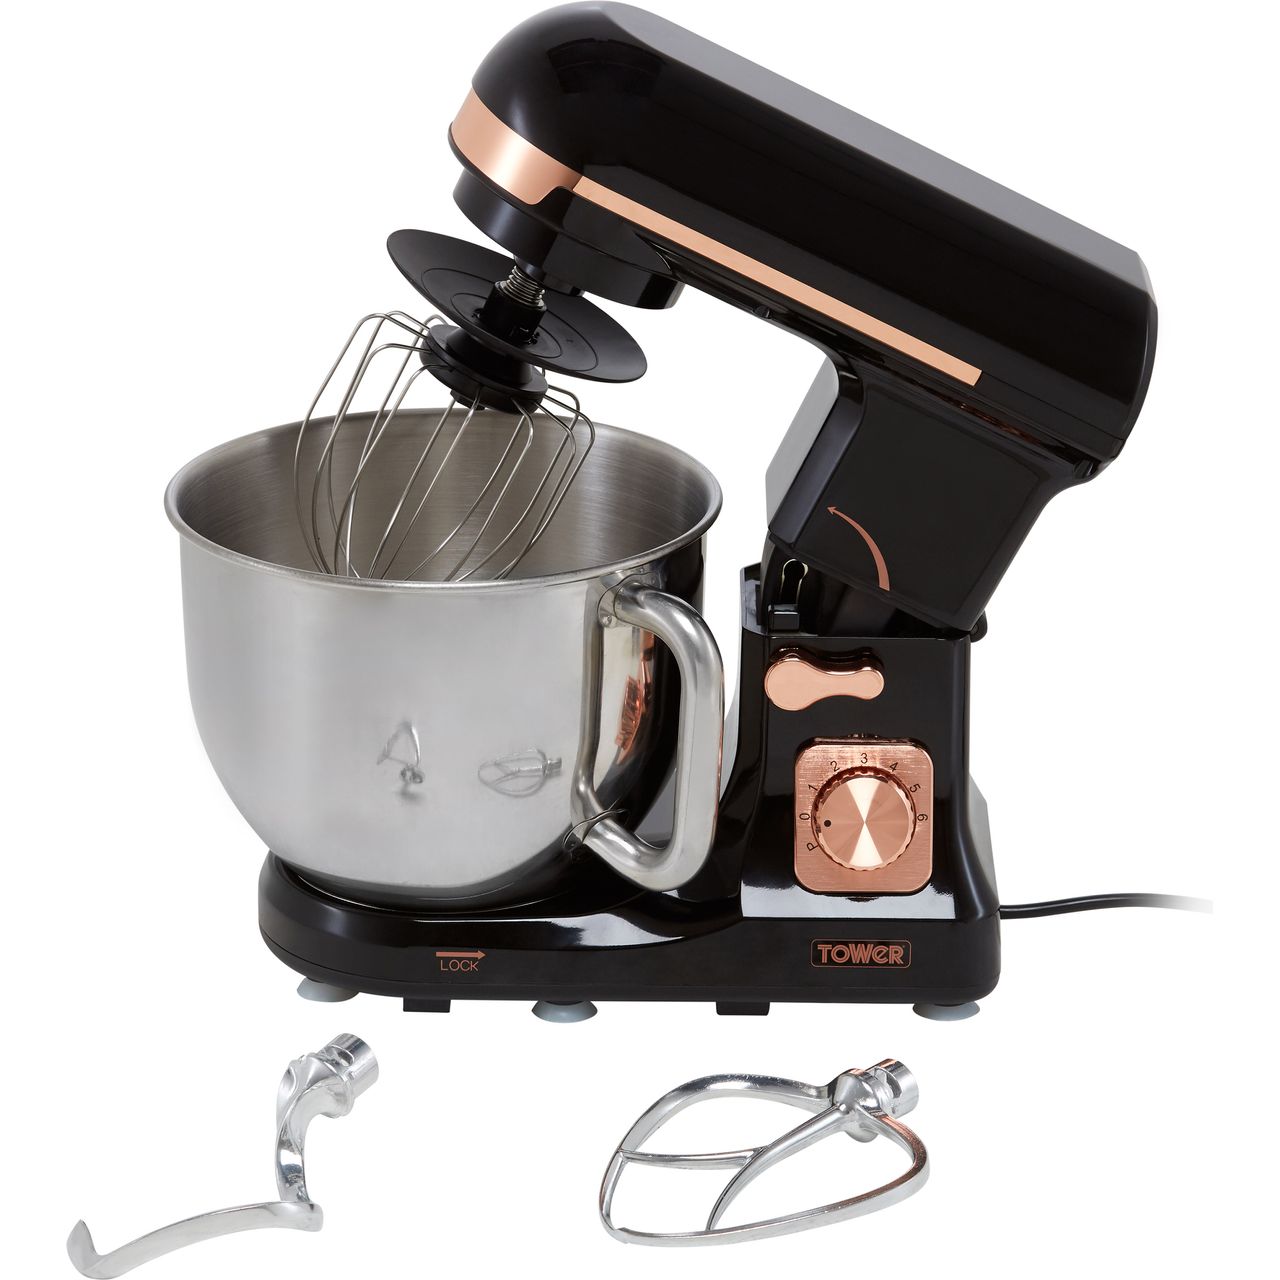 Tower T12033RG Stand Mixer with 5 Litre Bowl - Black / Rose Gold